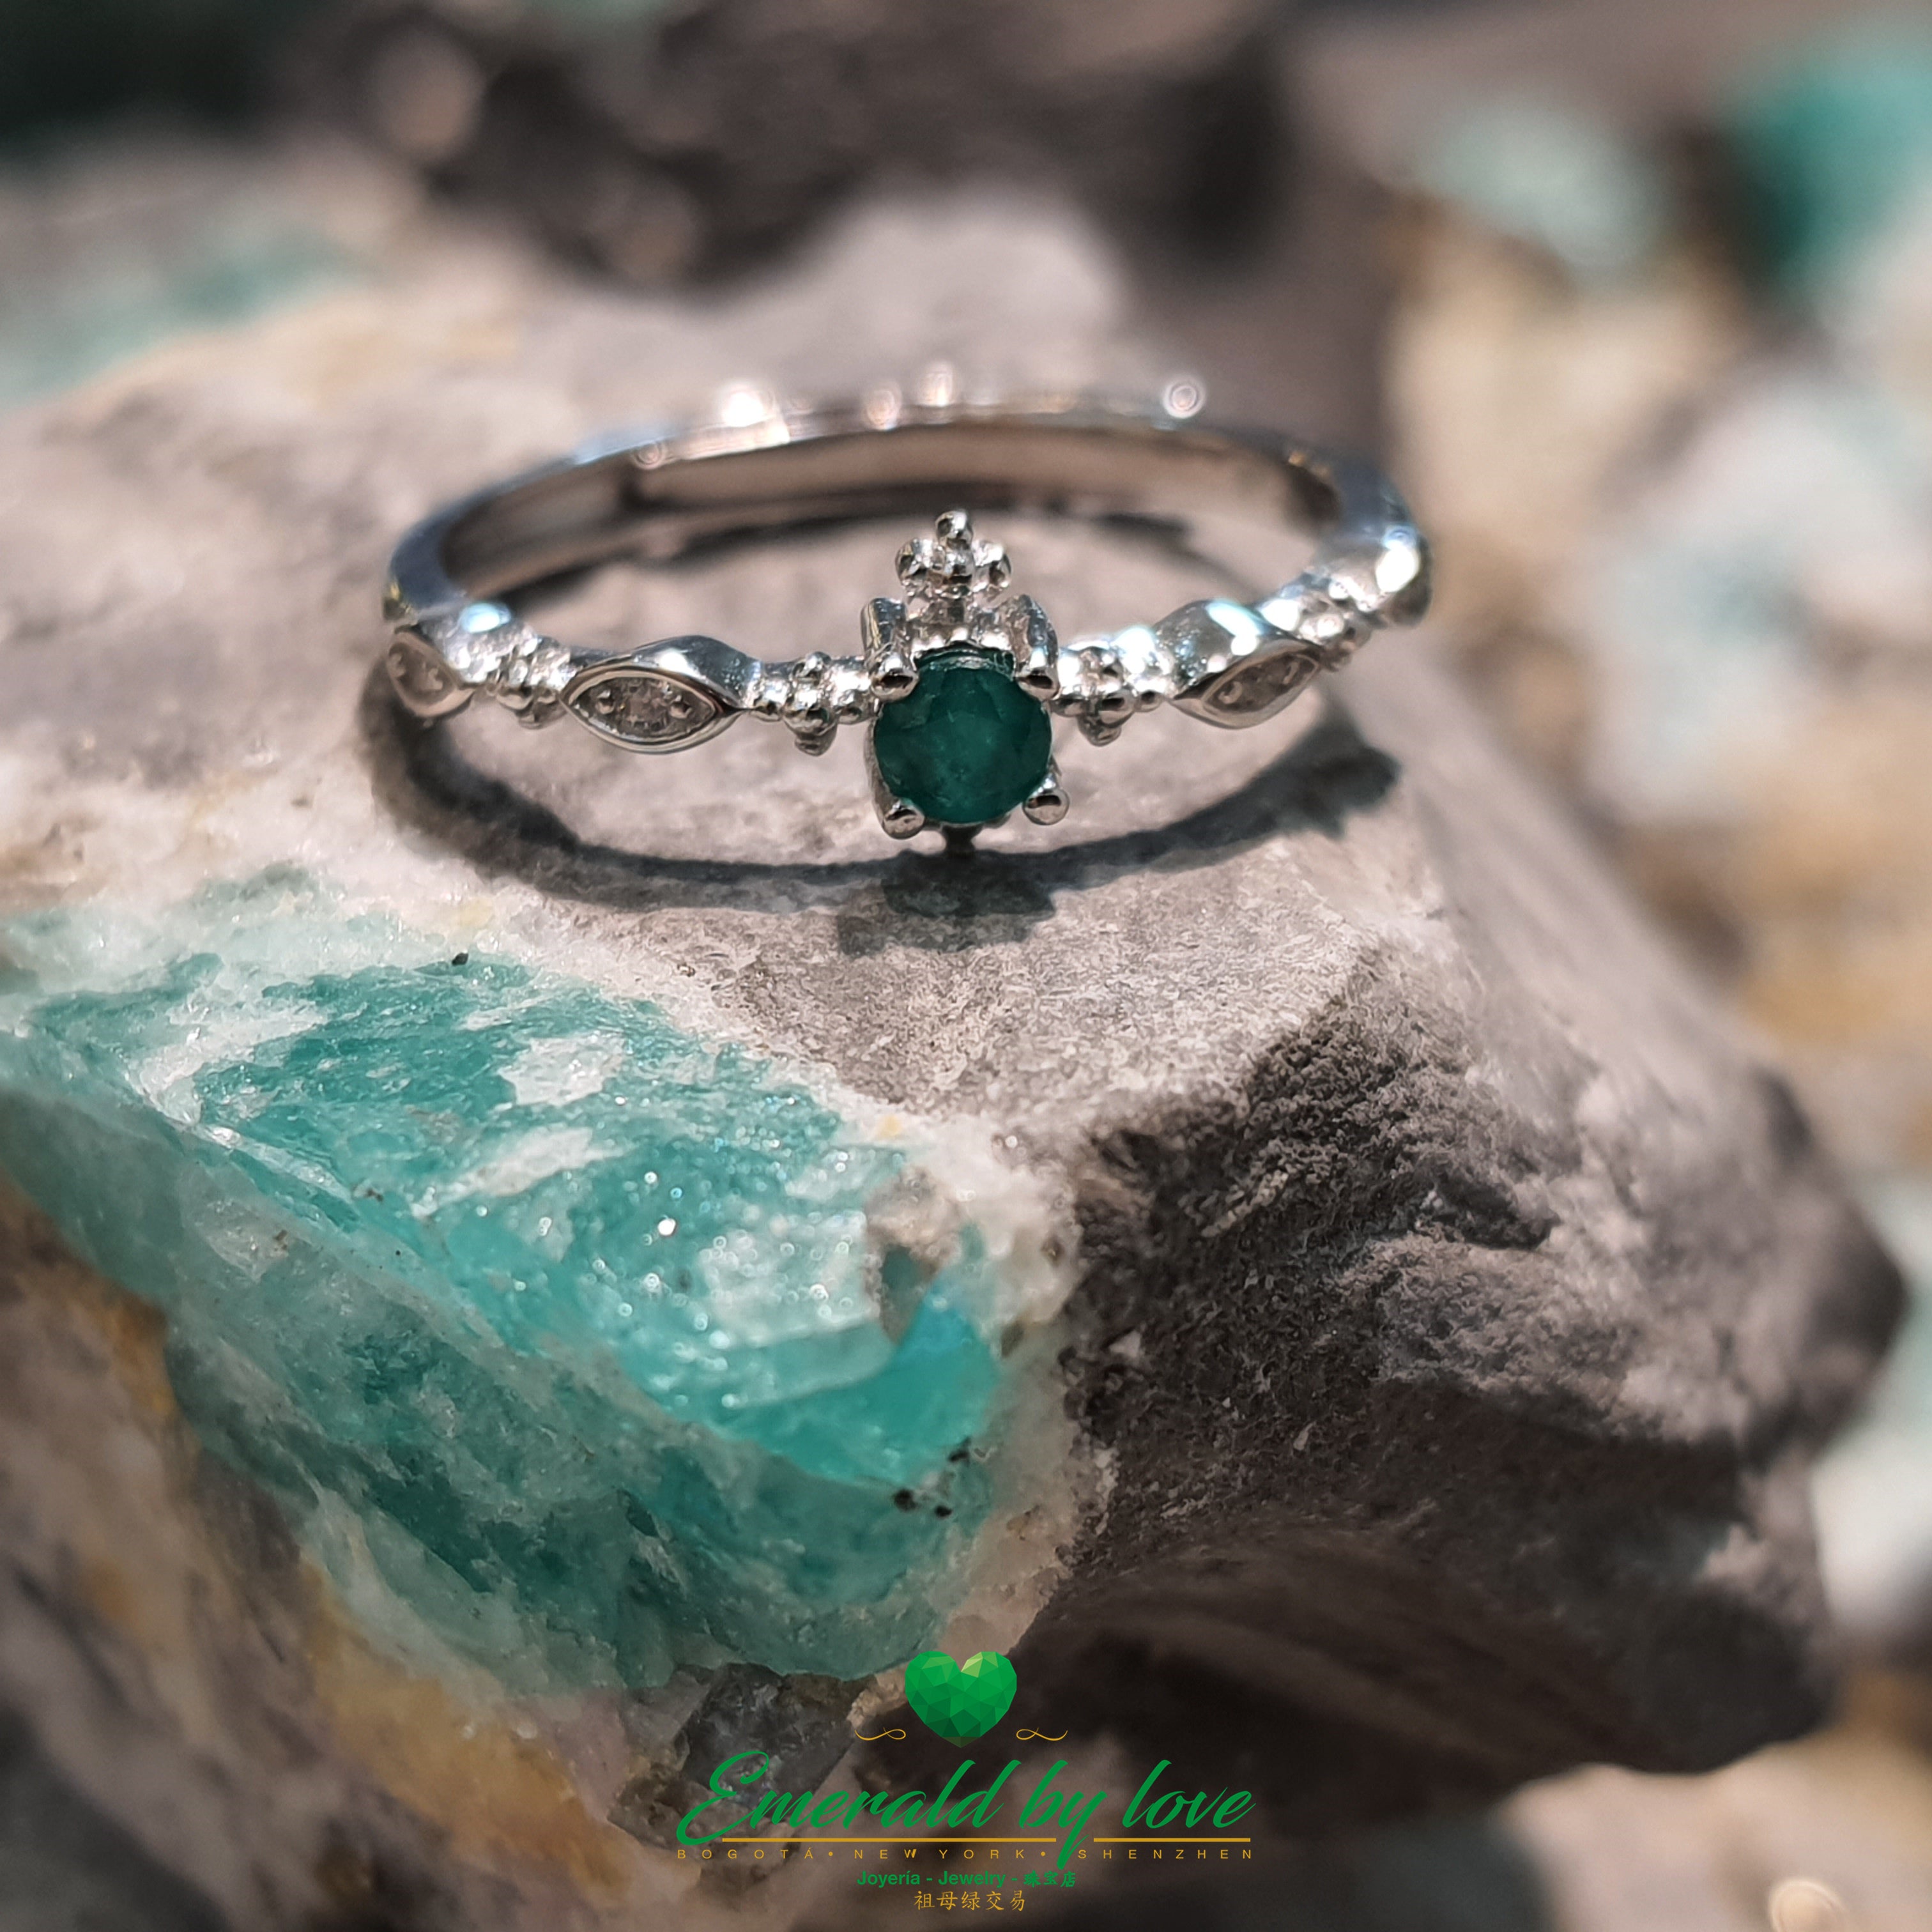 Slim Band Ring with CZ Embellishments and Round Central Emerald: Delicate Glamour